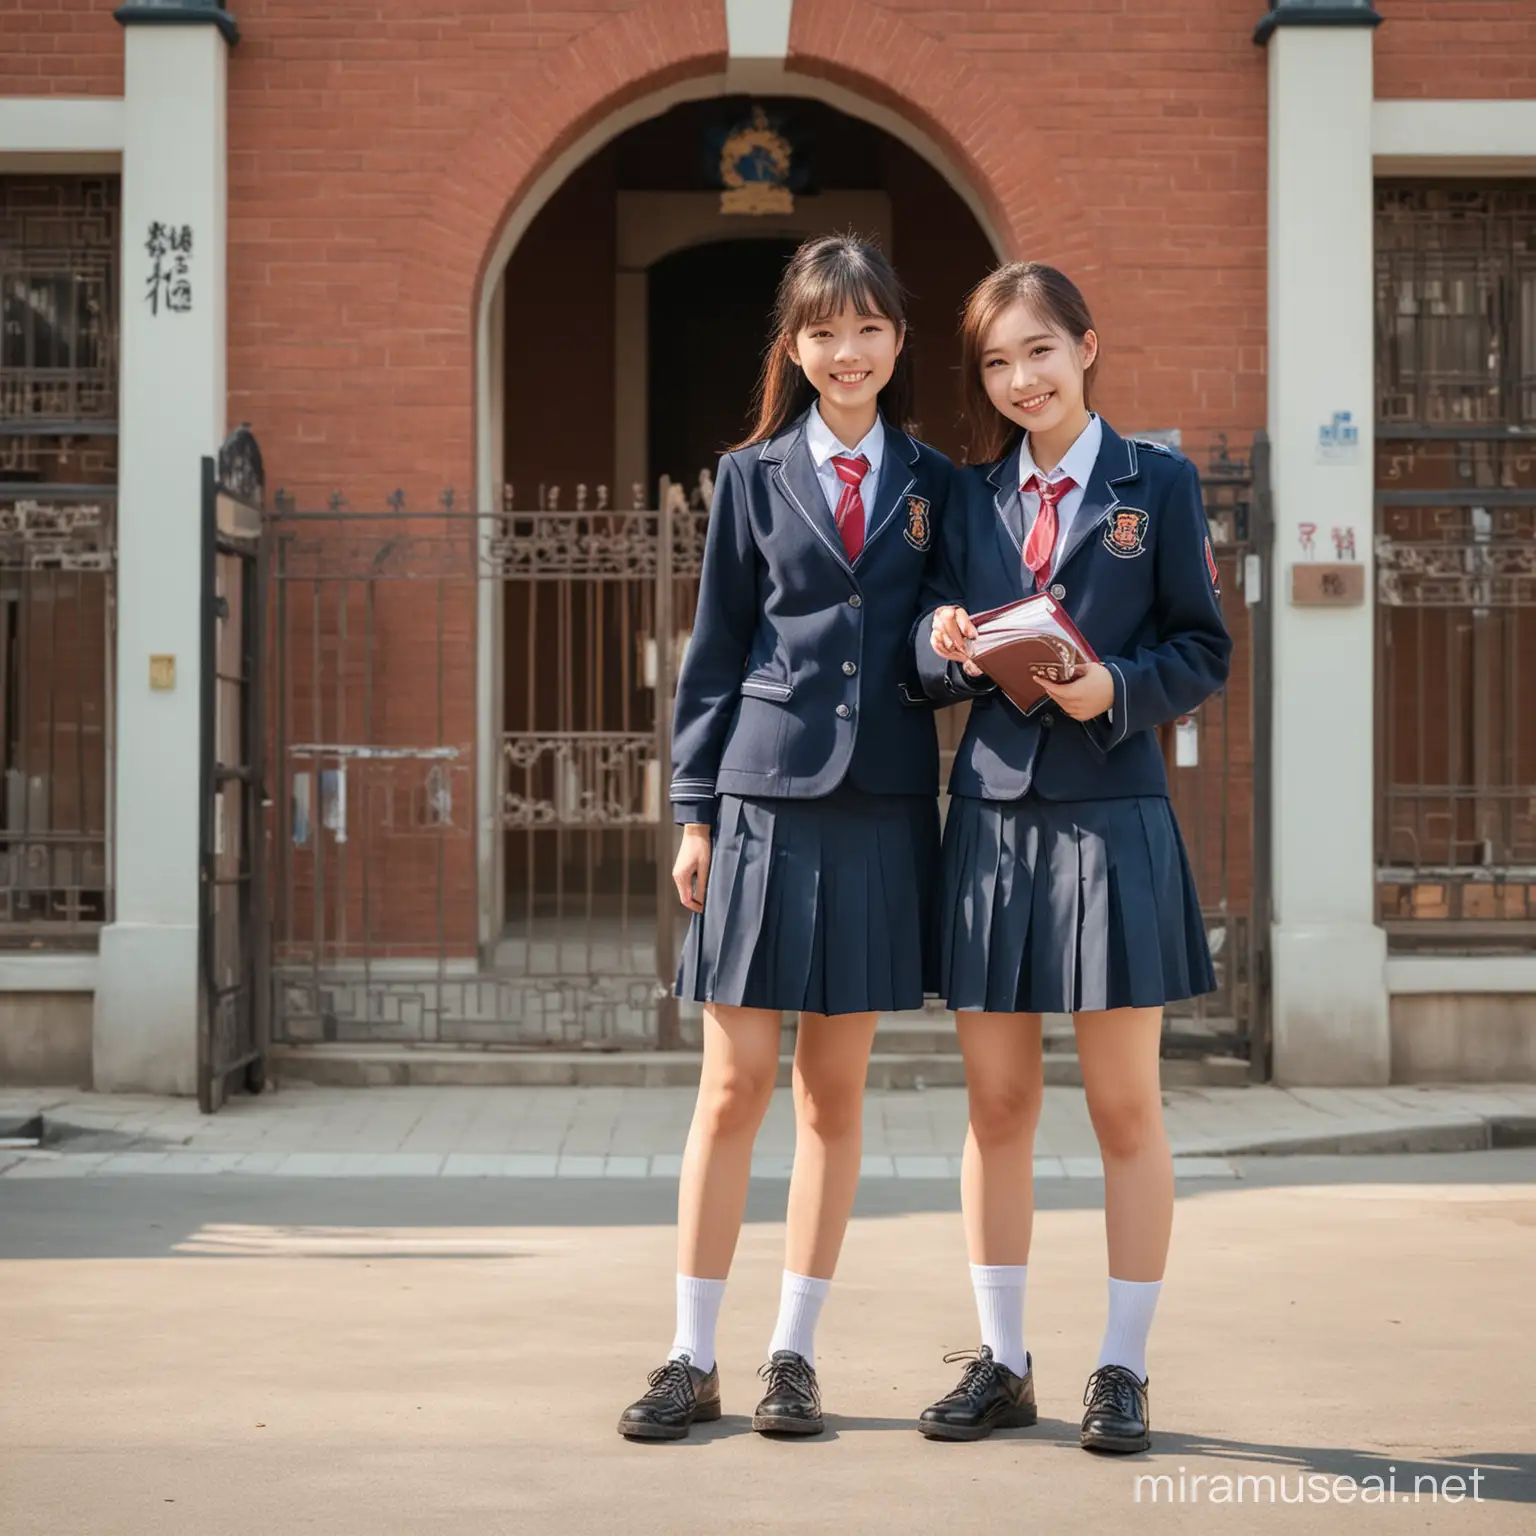 Boy and girl in China high school uniform, full body couple picture stand in front of school front gate in a sunshine day